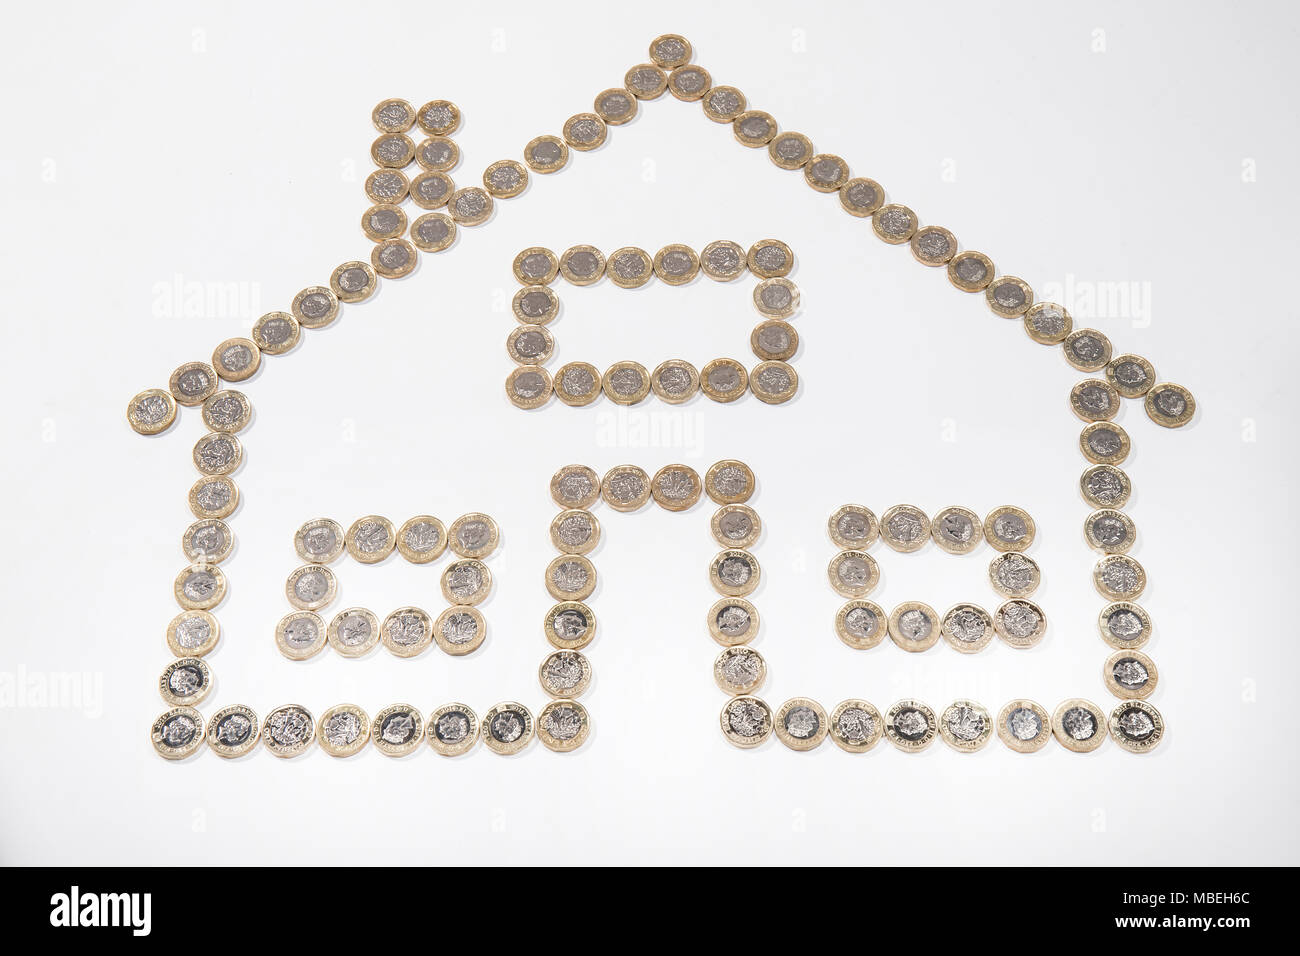 UK £ coins laid out in the shape of a house with 3 windows Stock Photo